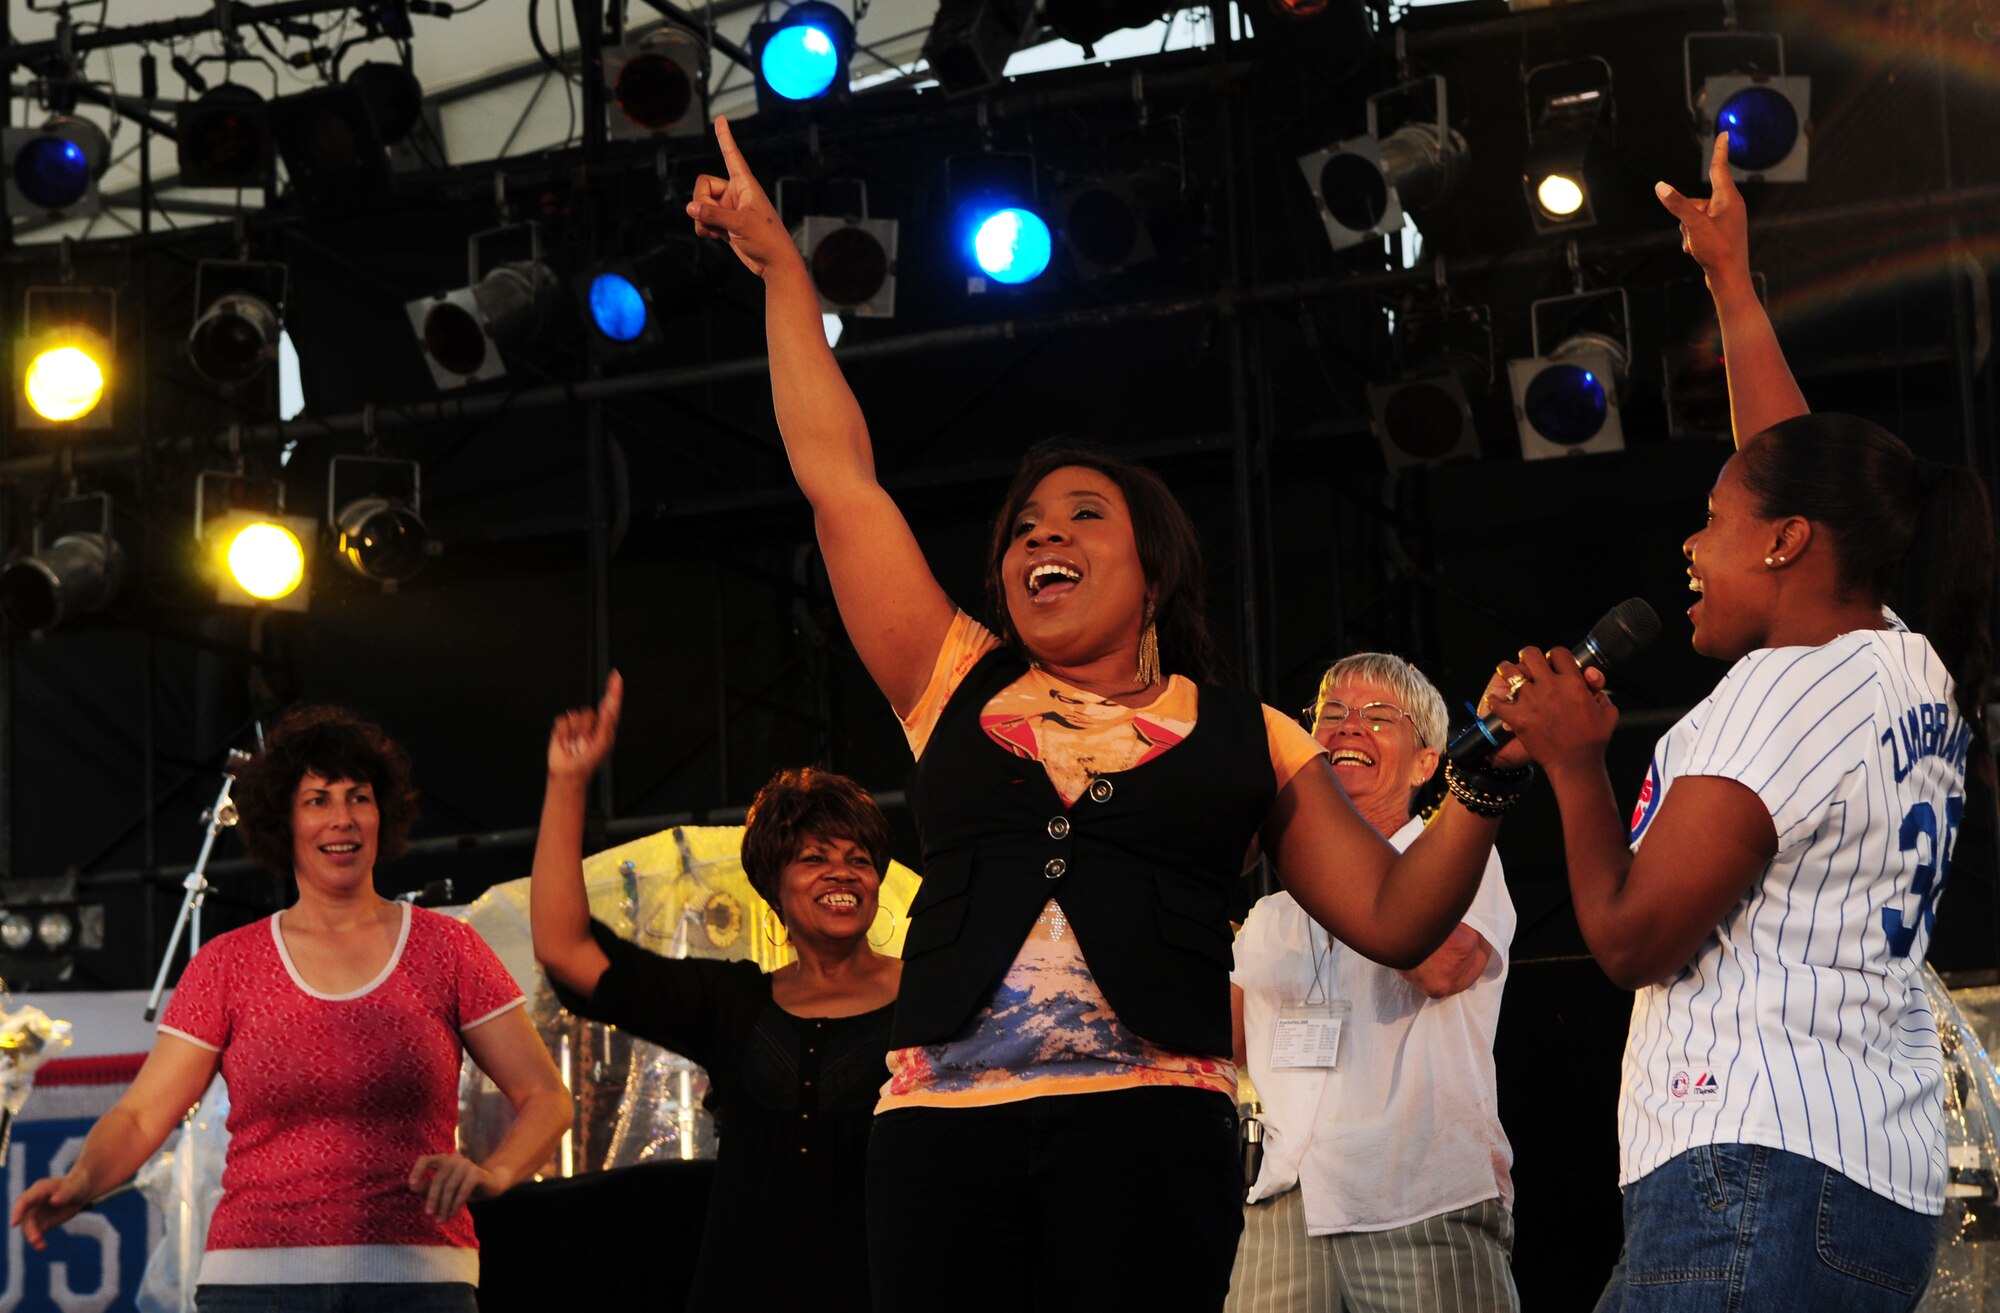 American Idol contestant Melinda Doolittle brings individuals from the crowd onstage to sing during her performance at AmericaFest 2009 at Kadena Air Base July 4. July 9 at Kadena Air Base, Japan. (U.S. Air Force photo/Staff Sgt. Lakisha Croley)                         